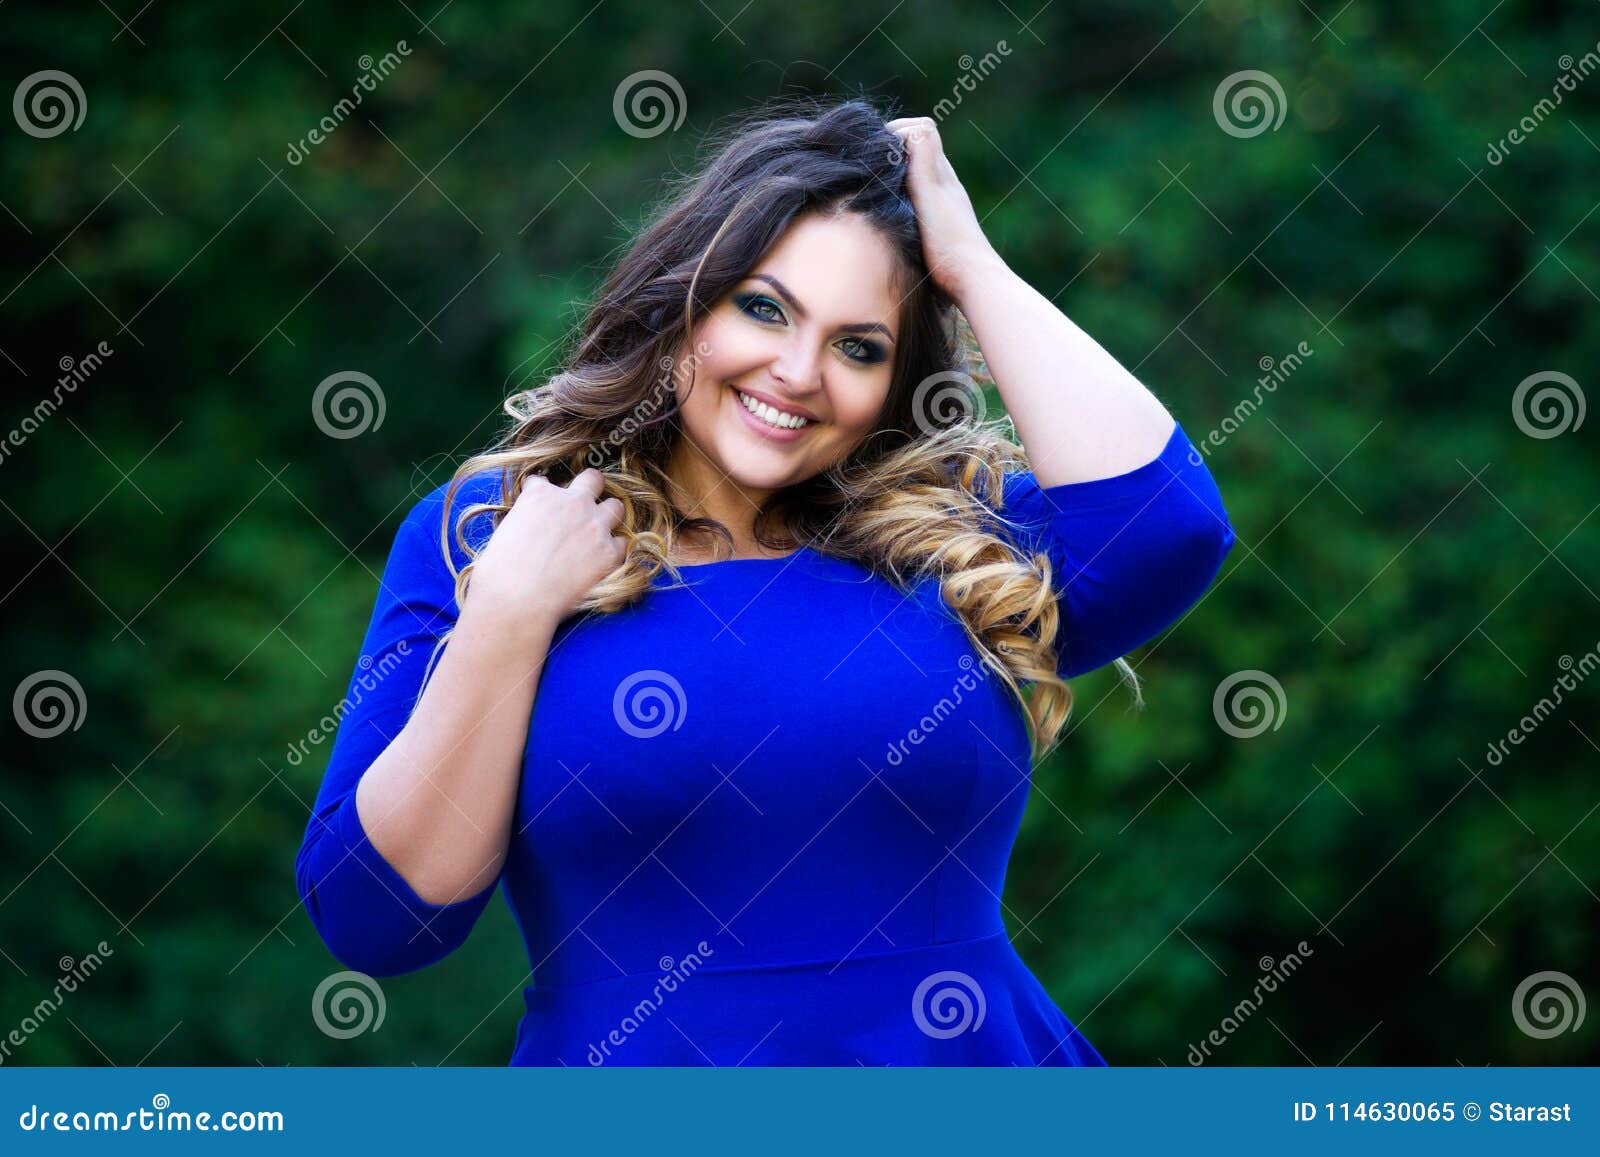 Happy Plus Size Fashion Model in Blue Dress Outdoors, Happiness Beauty ...